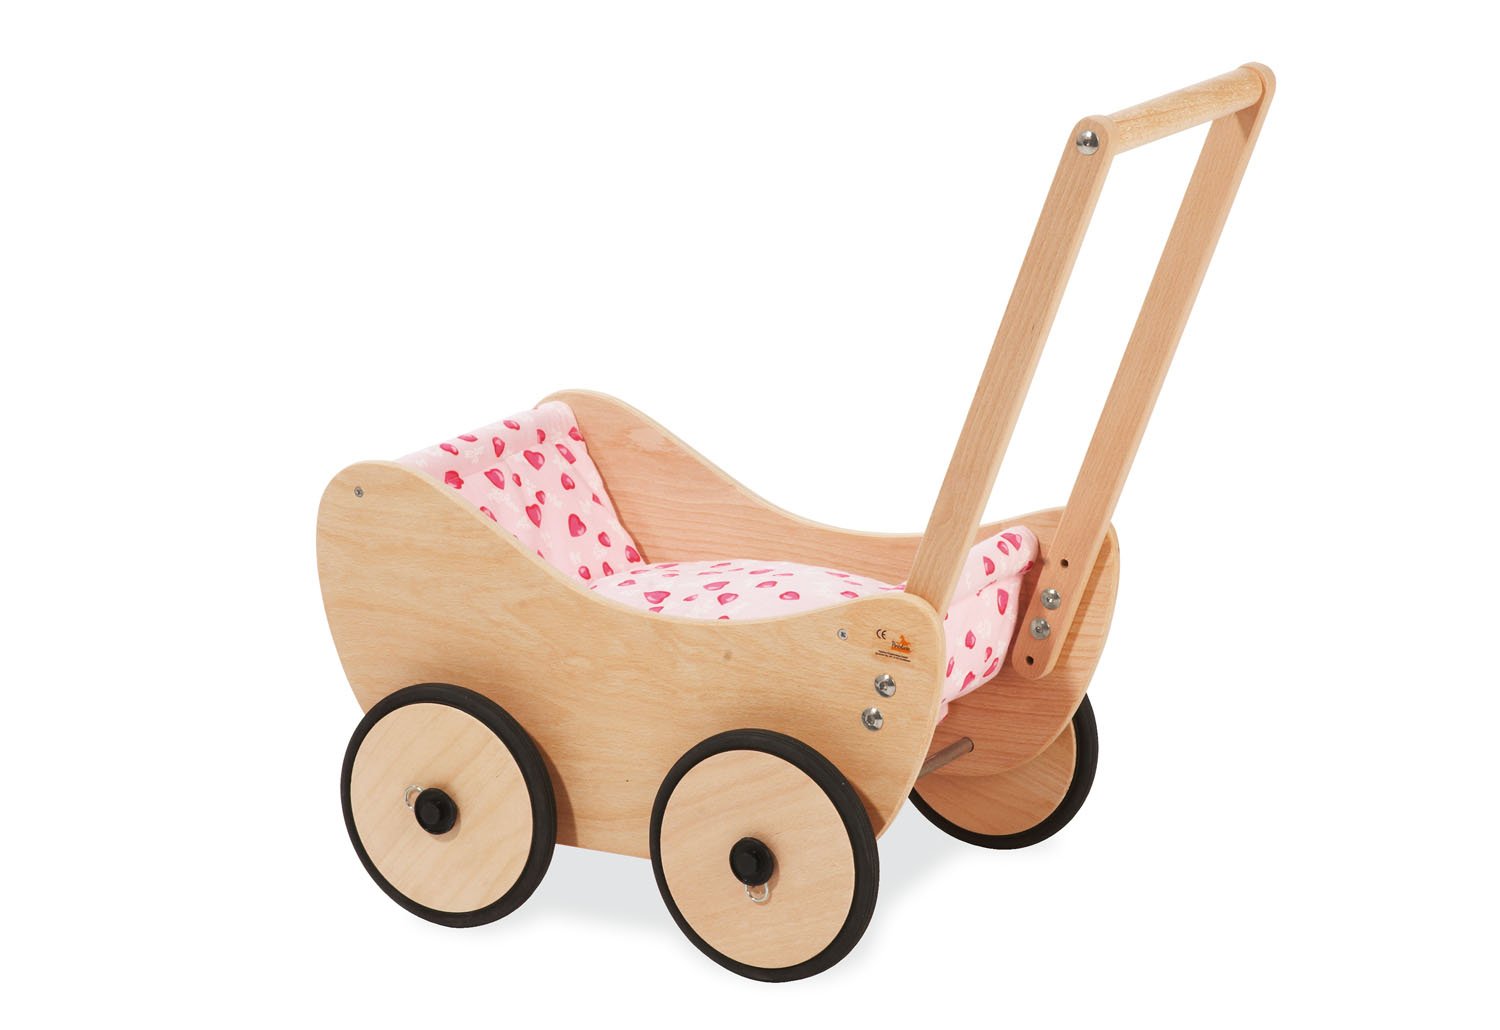 Pinolino dolls pram Trixi, made of wood, incl. Bedding and braking system, baby walker with rubberized wooden wheels, for children from 1 - 6 years, natural